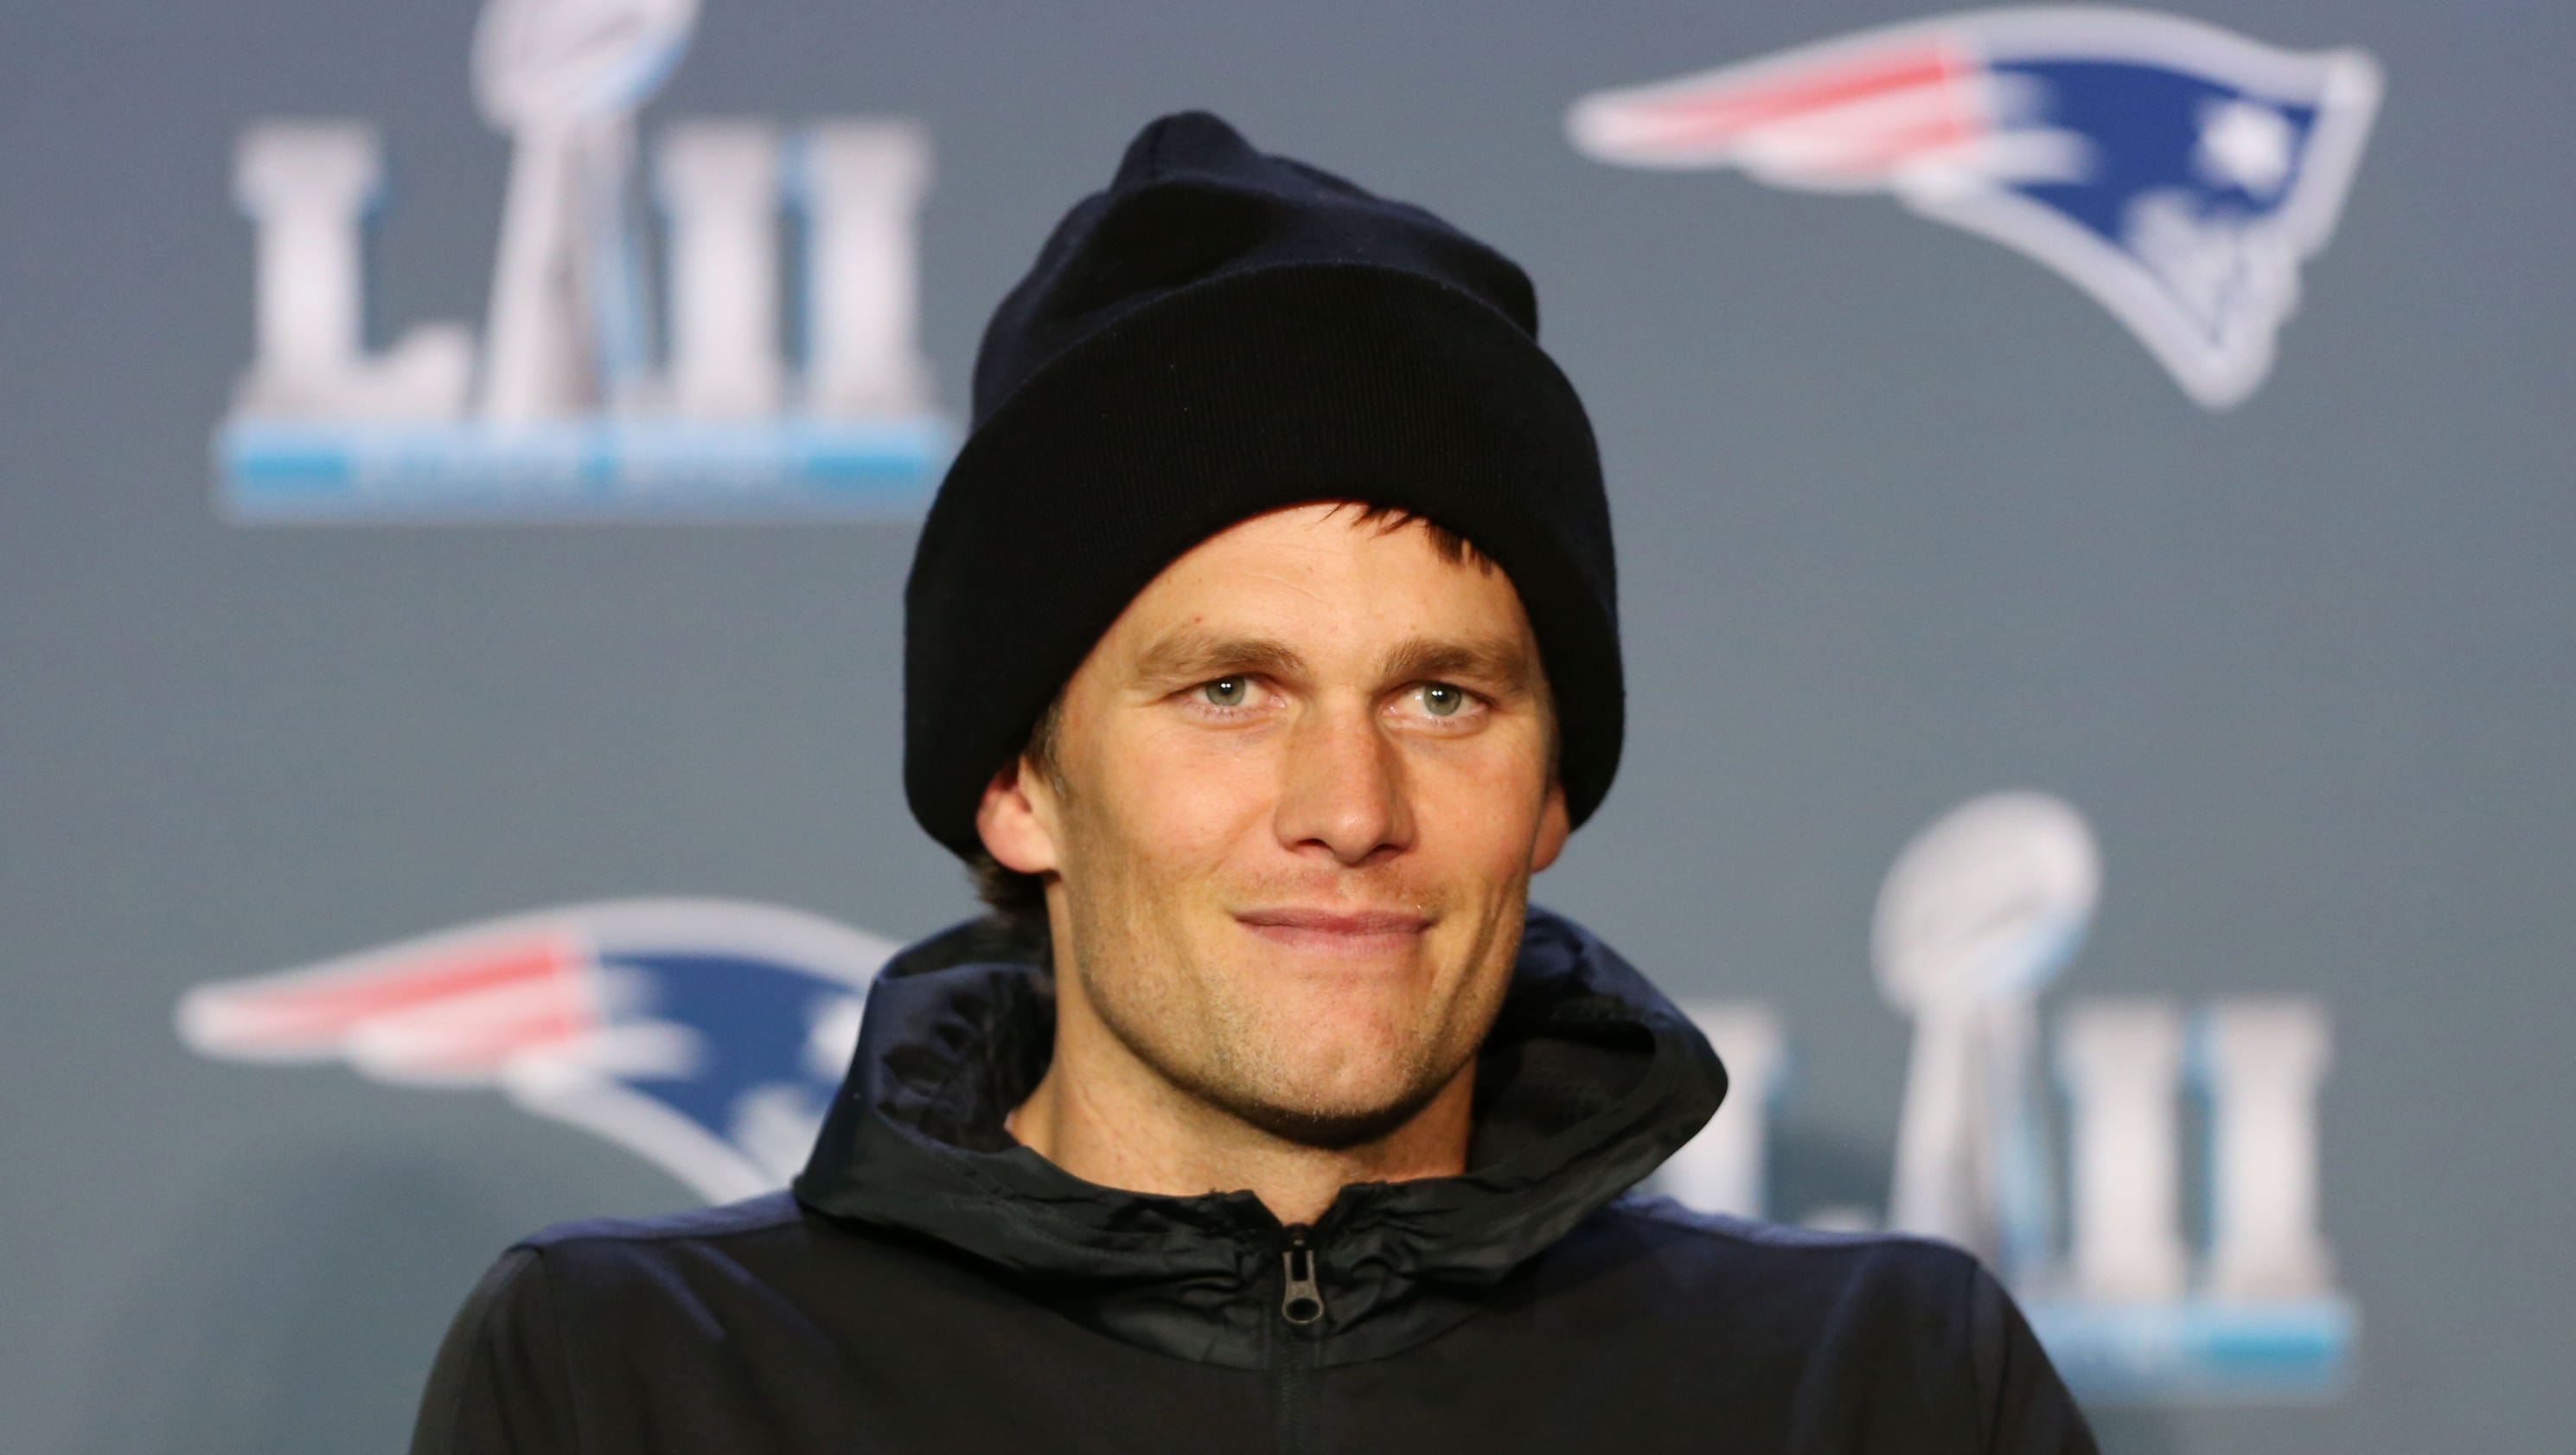 Tom Brady and fellow NFL players donate $700,000 to a federal PAC3200 x 1680